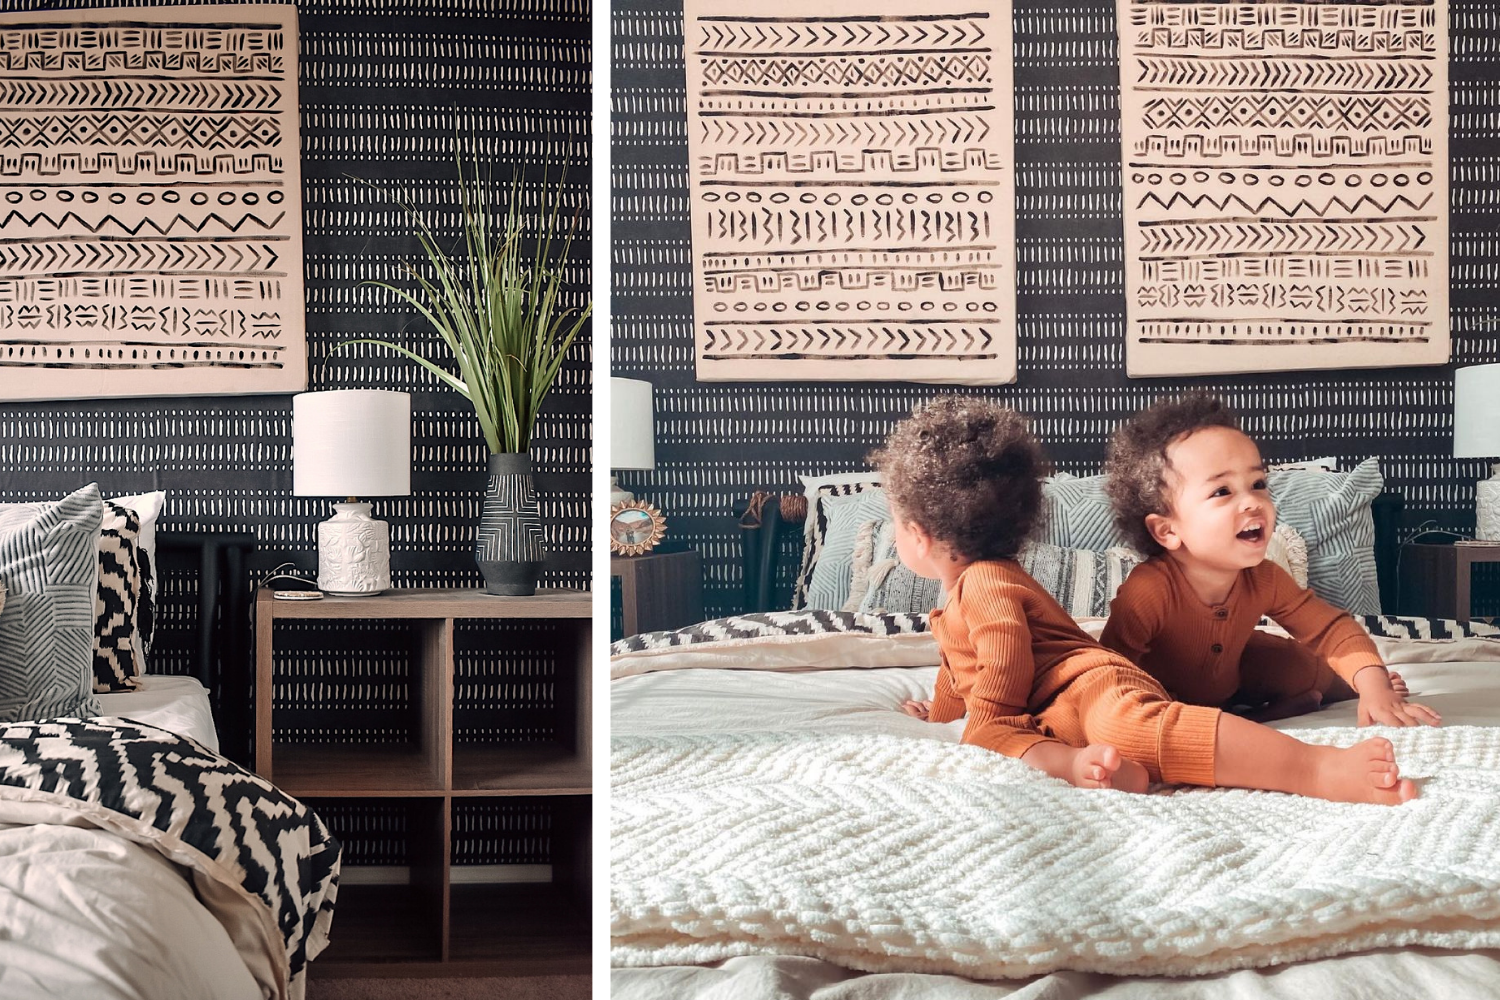 Two toddlers on a bed in a room with an expressive wallpaper pattern